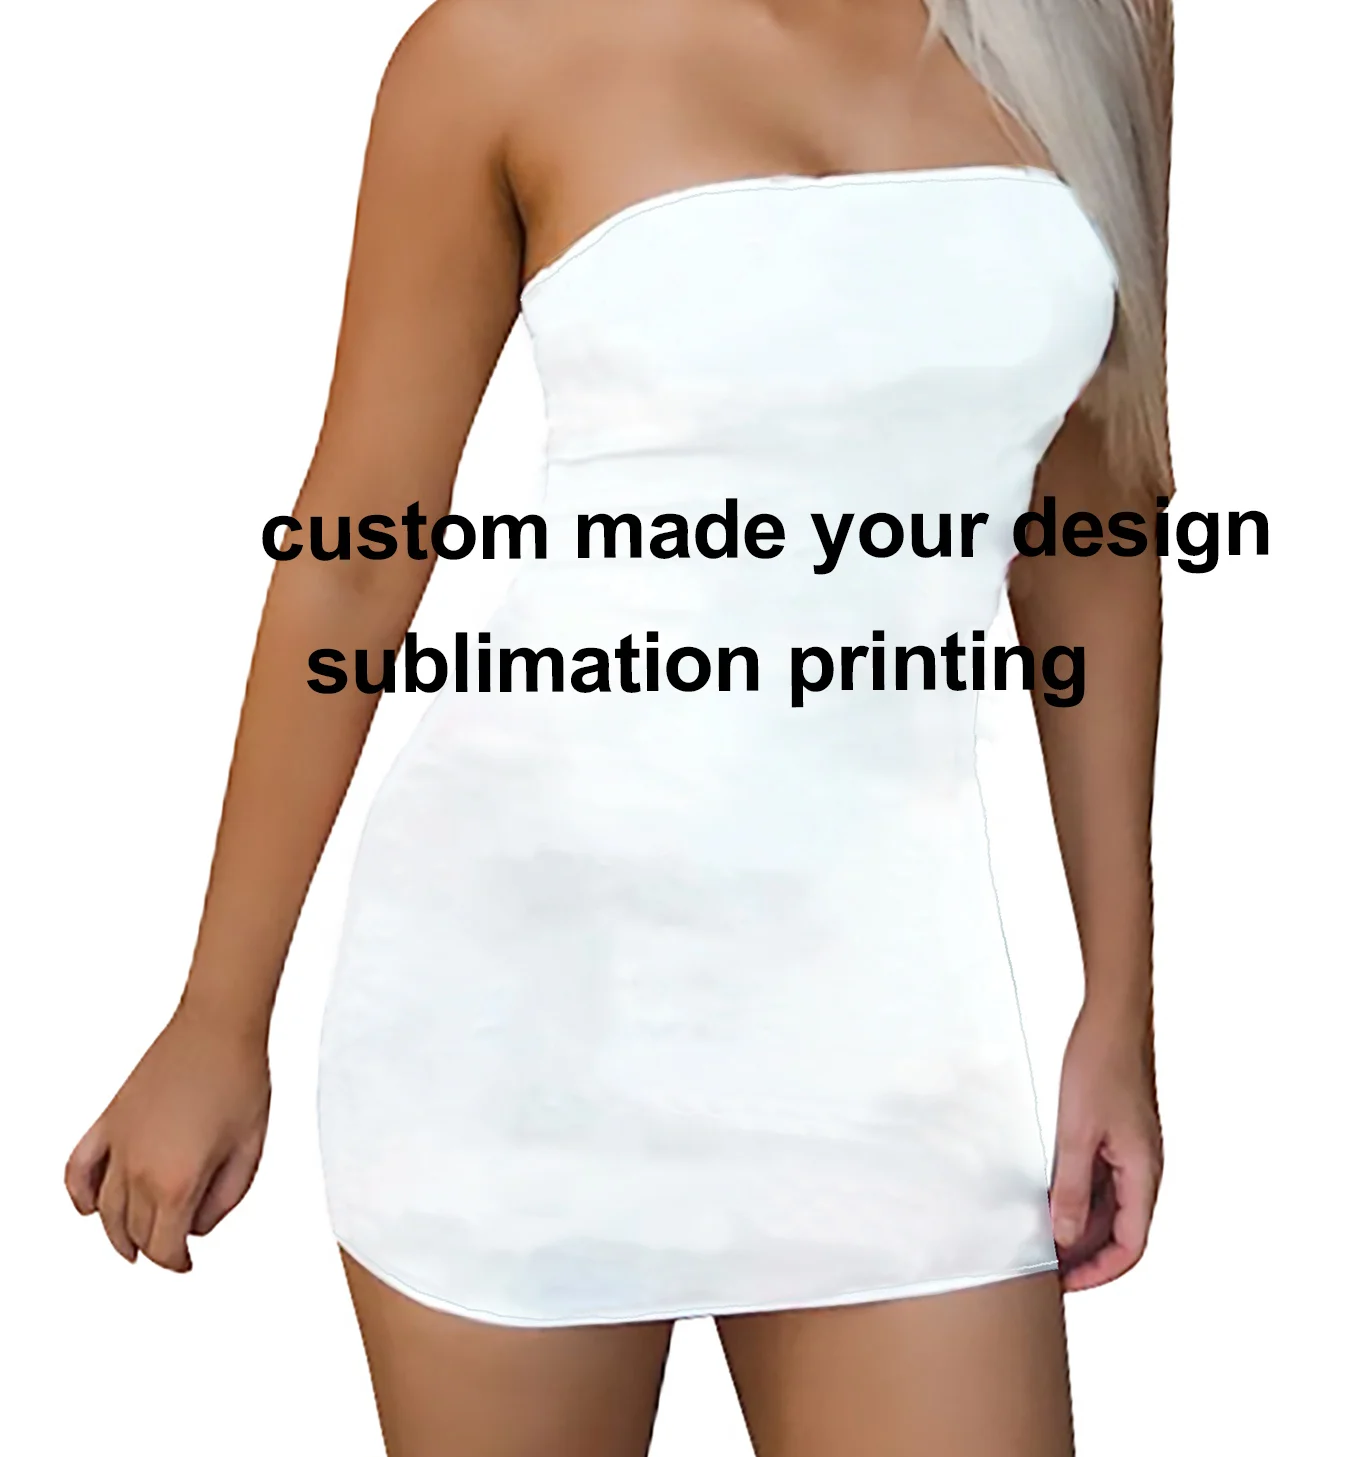 Summer Women Custom Made Your Design Sublimation Printing Bodycon Sundress Strapless Stretchy Sexy Off Shoulder Tube Dress